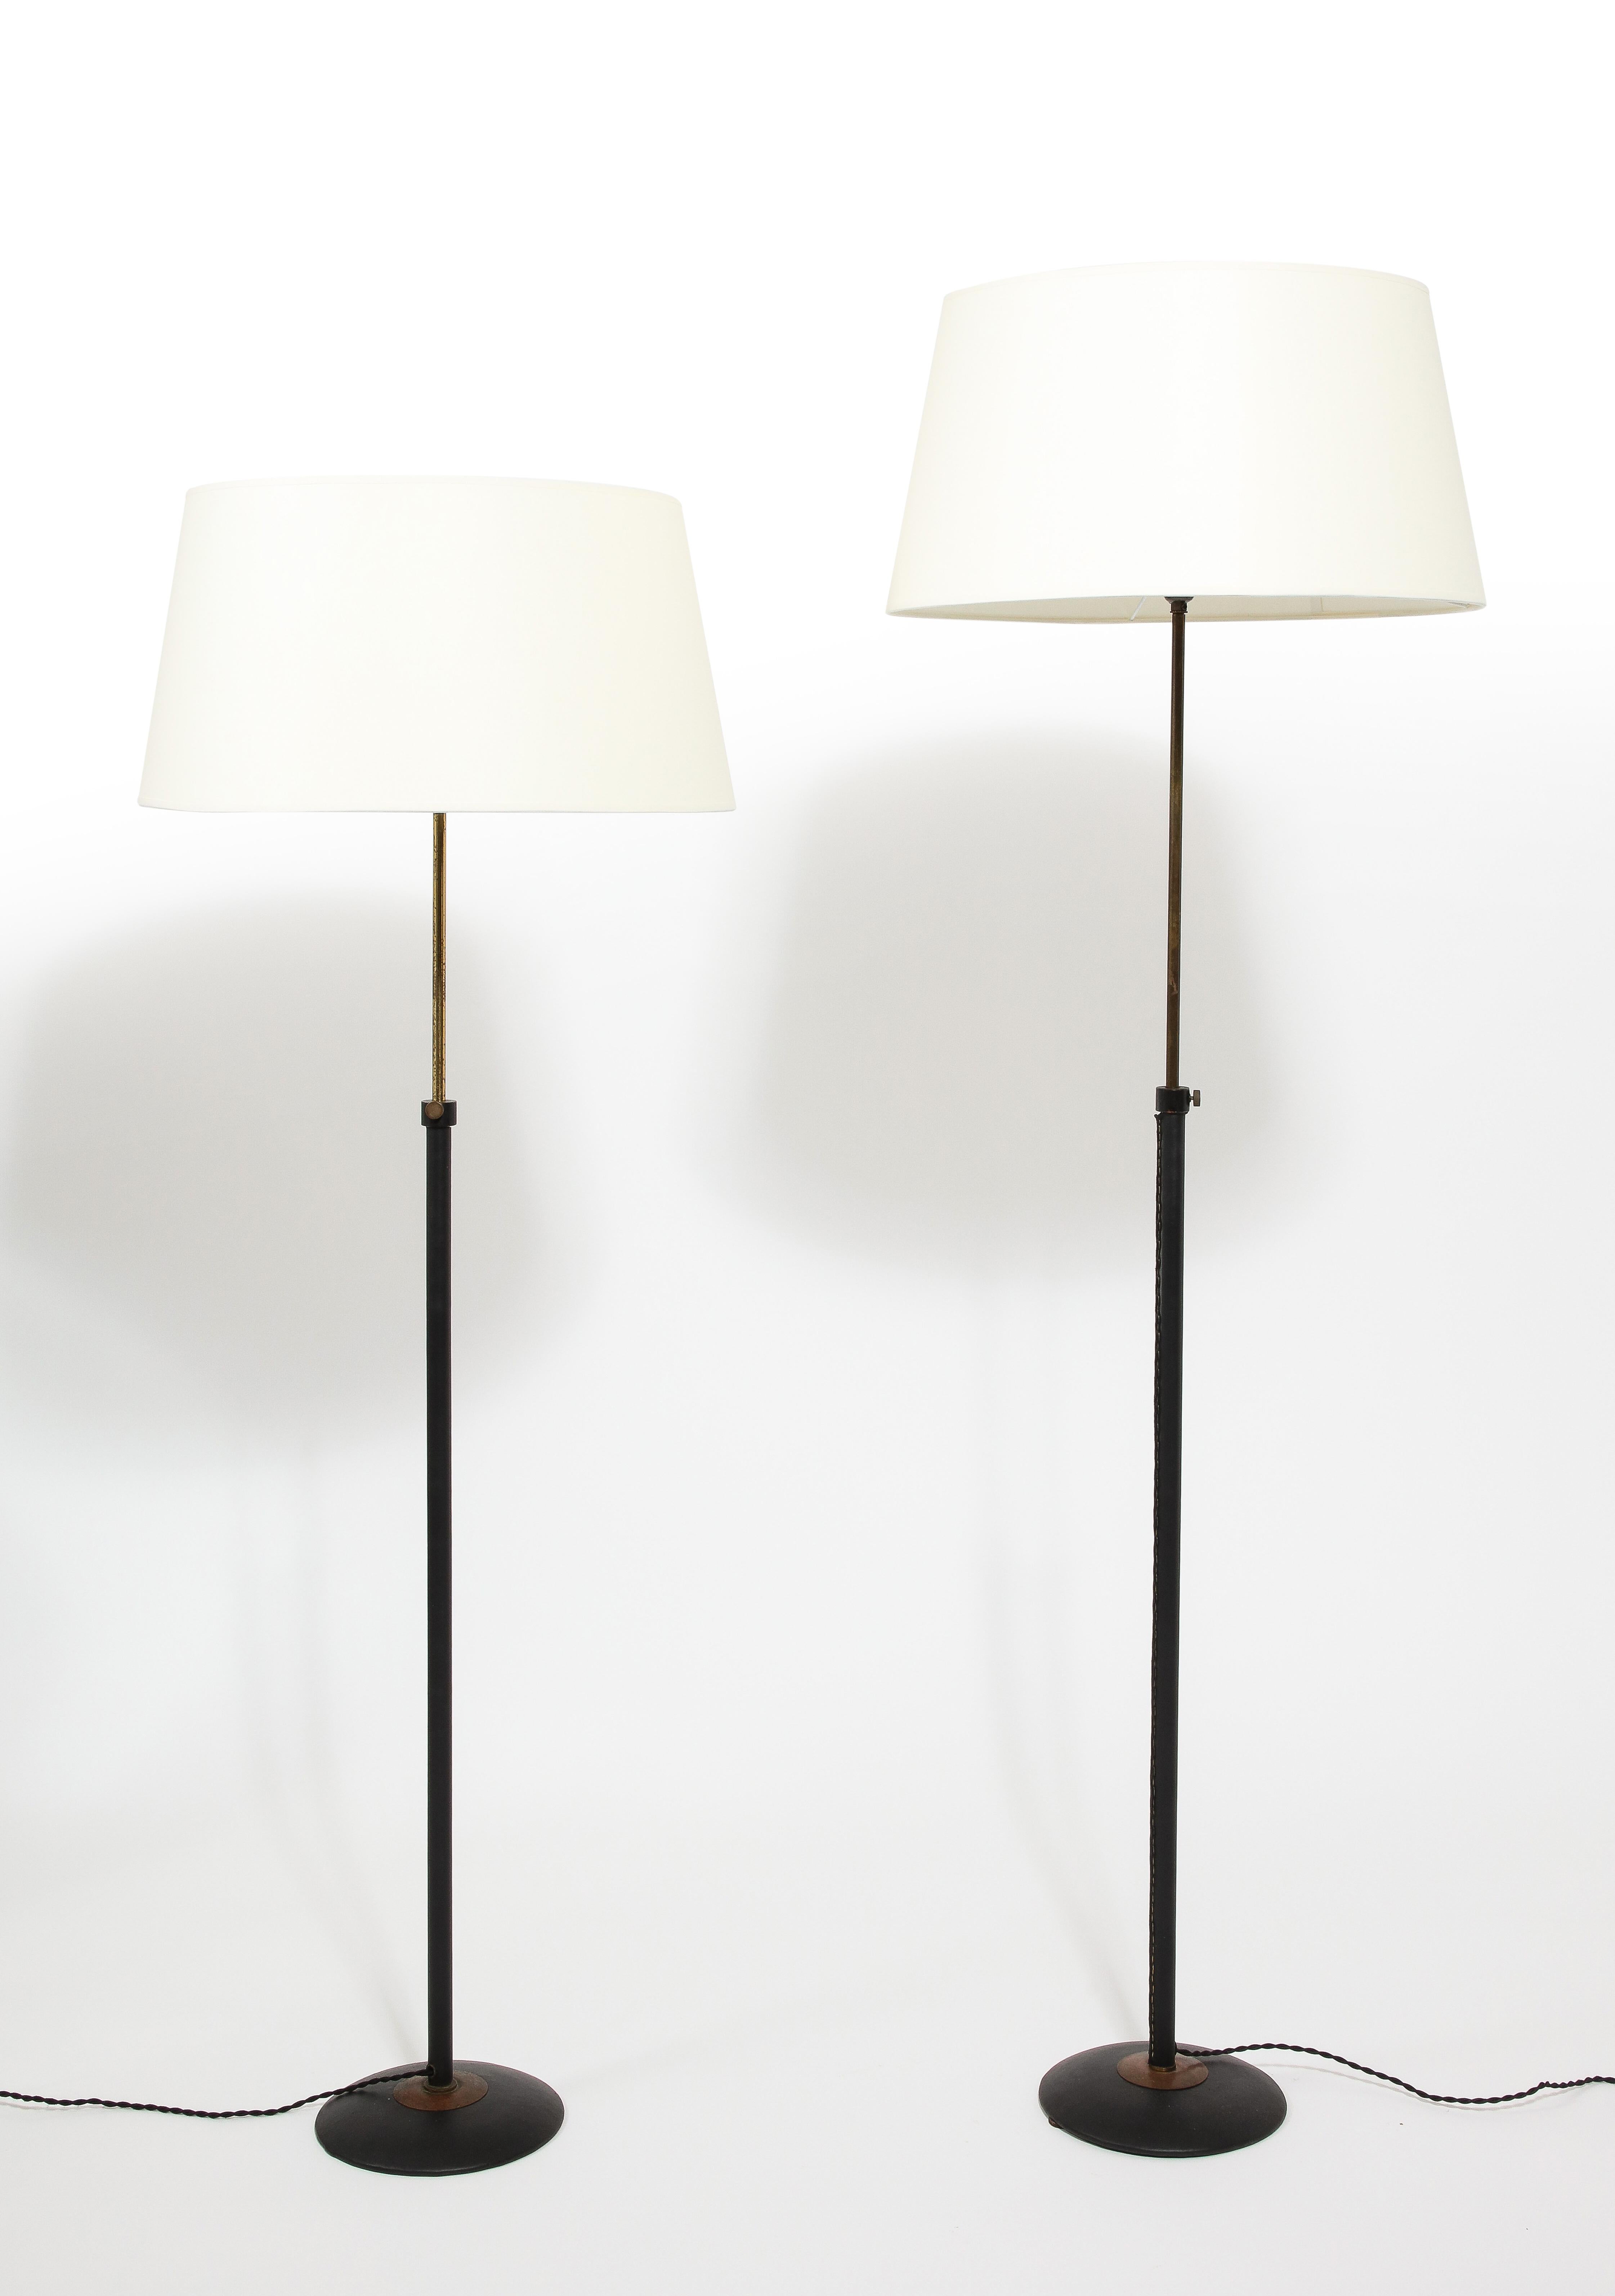 Adnet Style Brass & Black Leather Wrapped Adjustable Floor Lamps, France 1960's In Good Condition For Sale In New York, NY